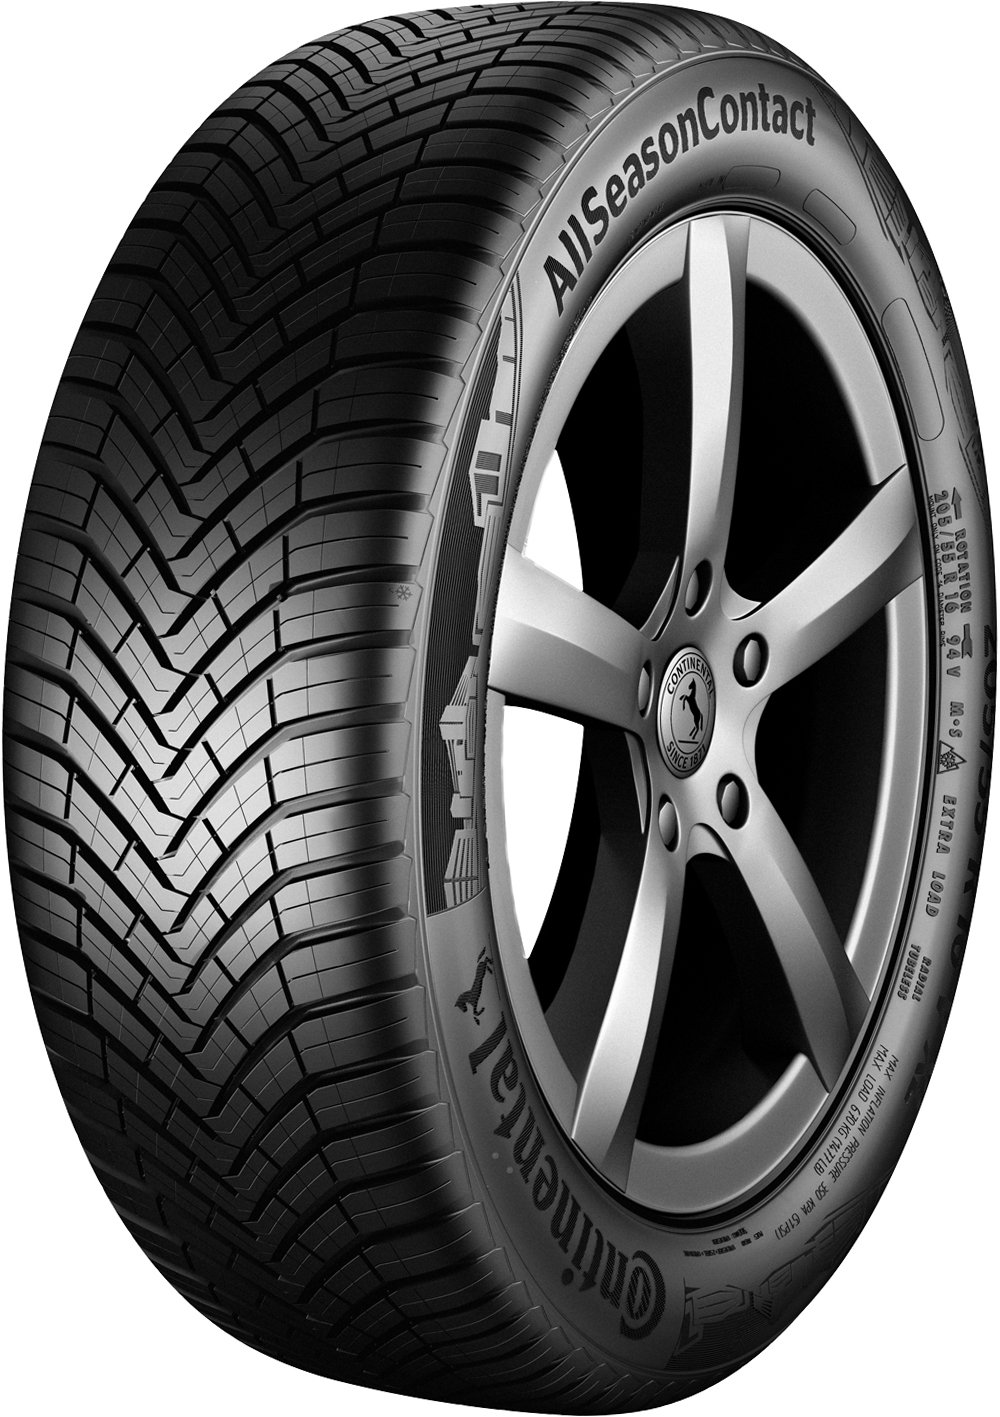 Anvelope auto CONTINENTAL All Season Contact XL 215/55 R17 98